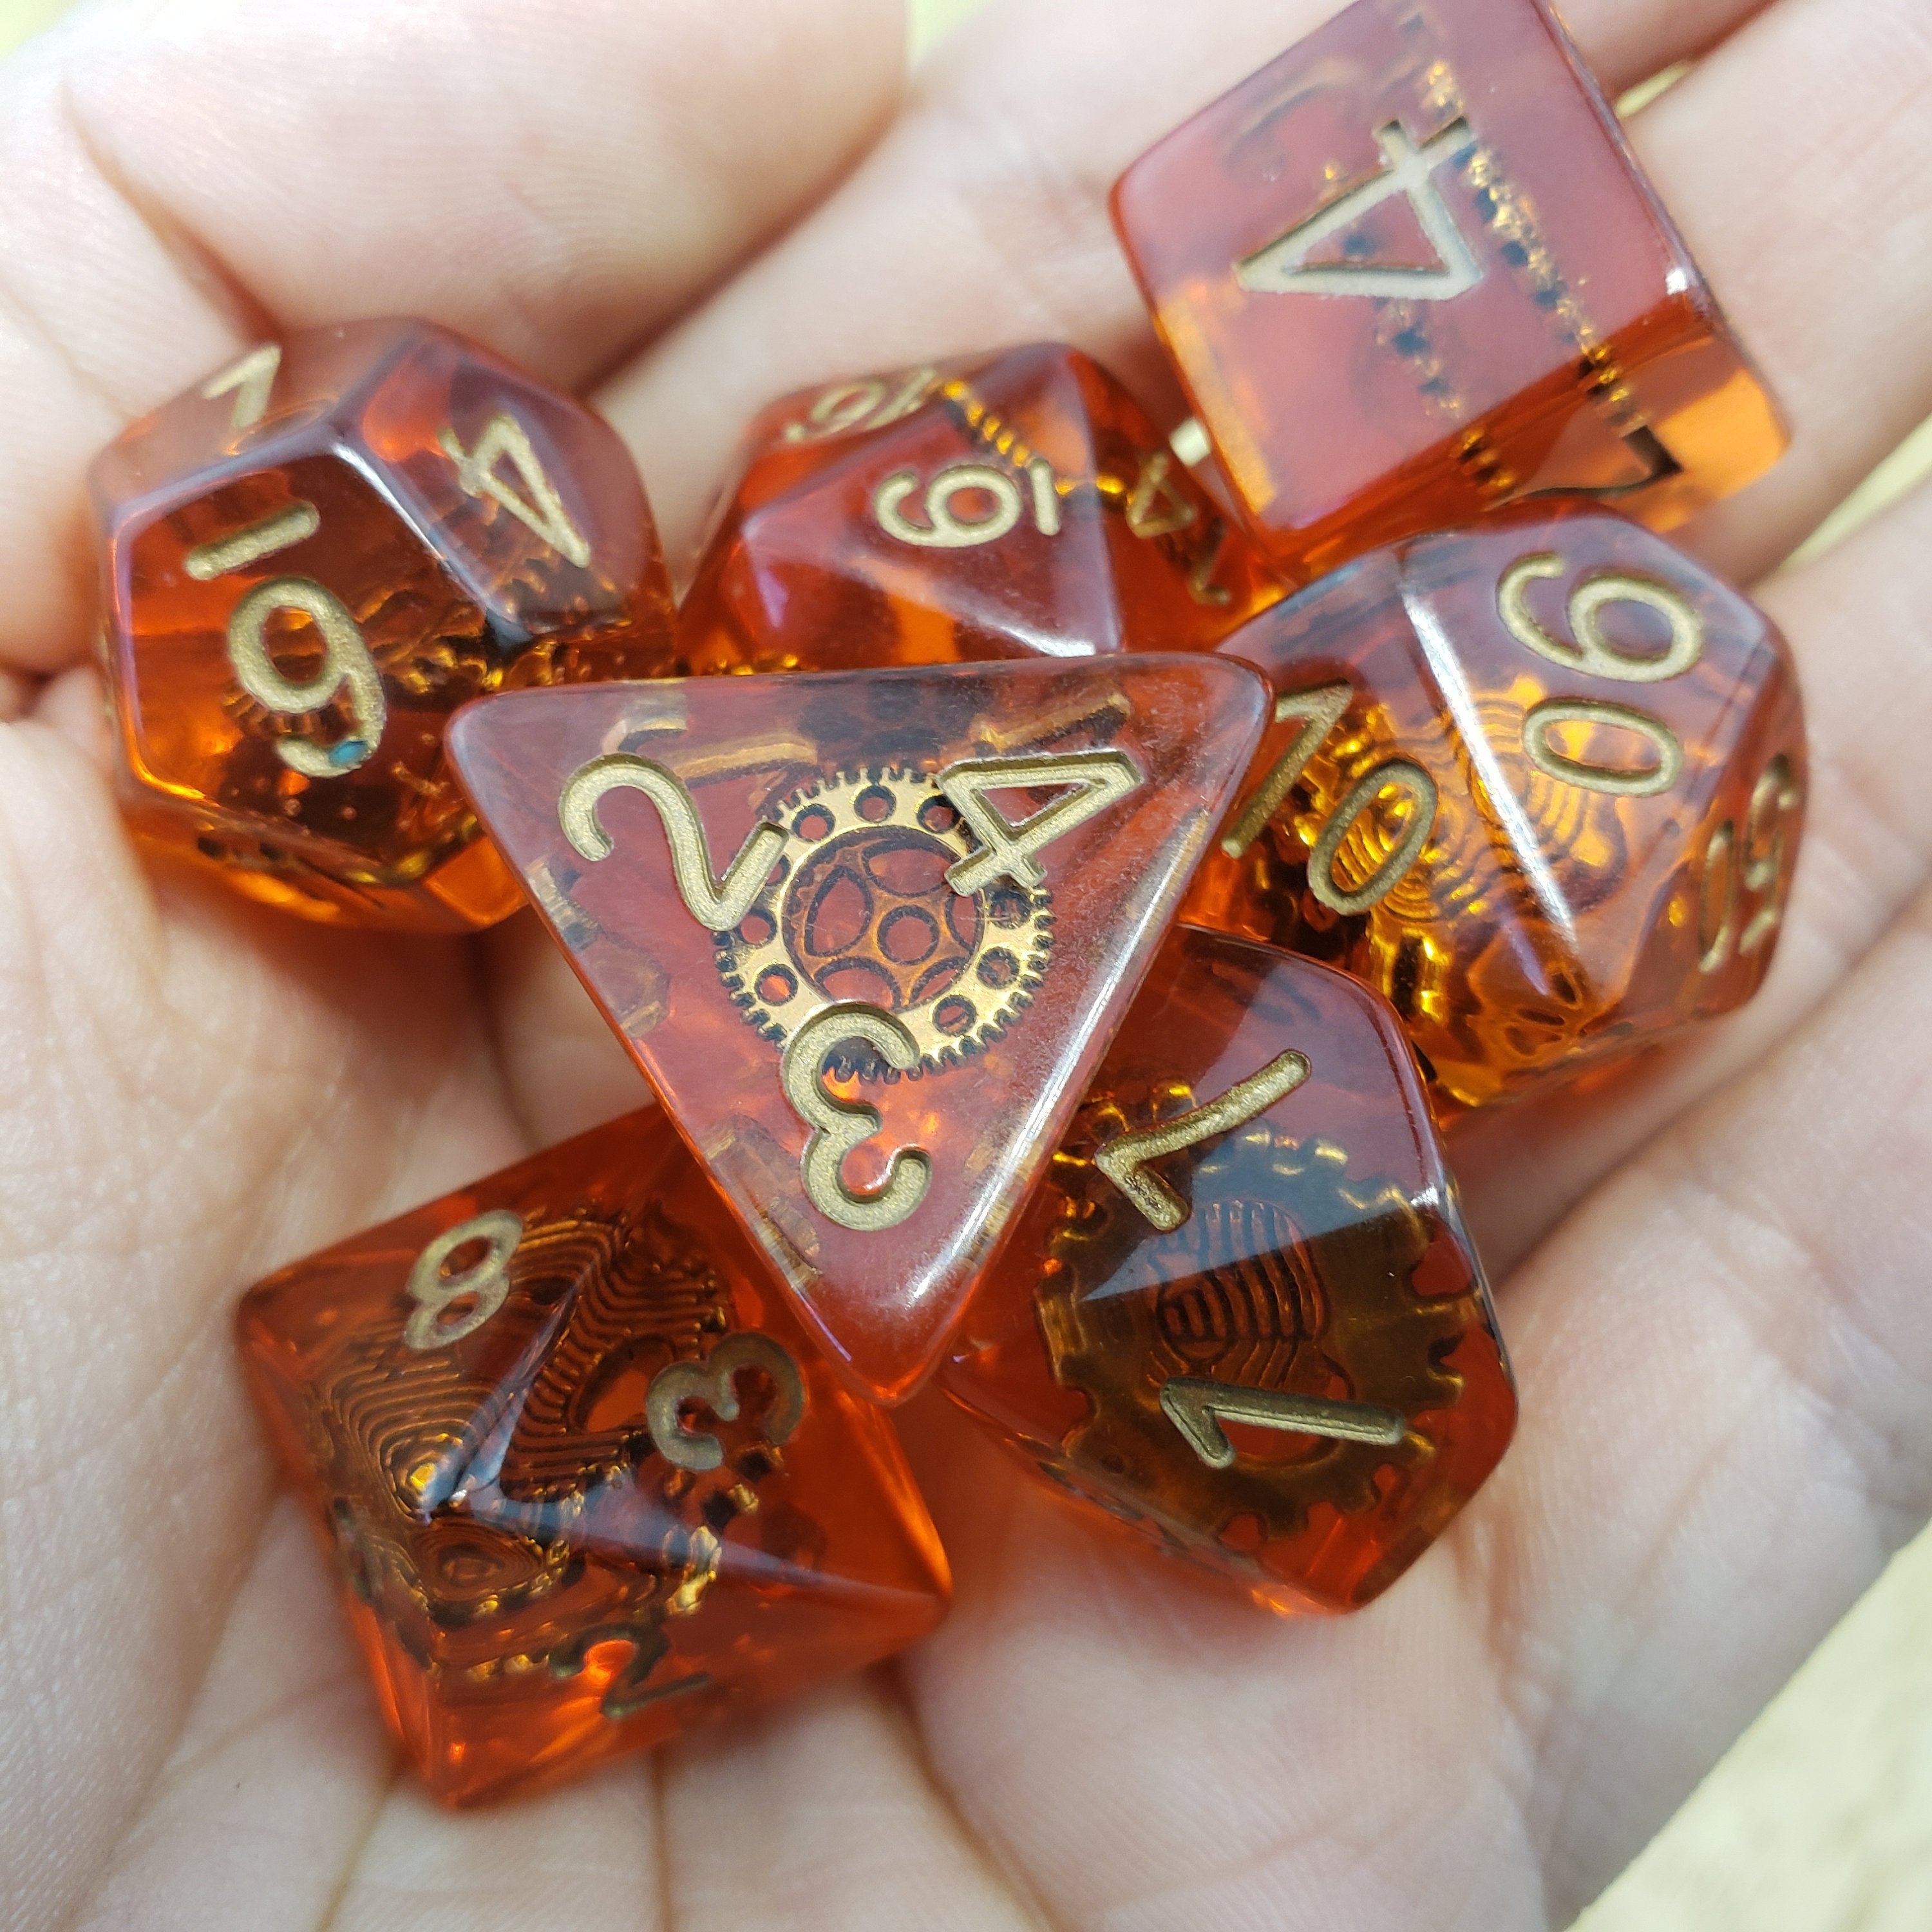 Artificer Dice Set | 7 Polyhedral Dice Set | Dungeons & Dragons | DnD Dice | Resin Dice | Gear Dice | Steampunk Dice